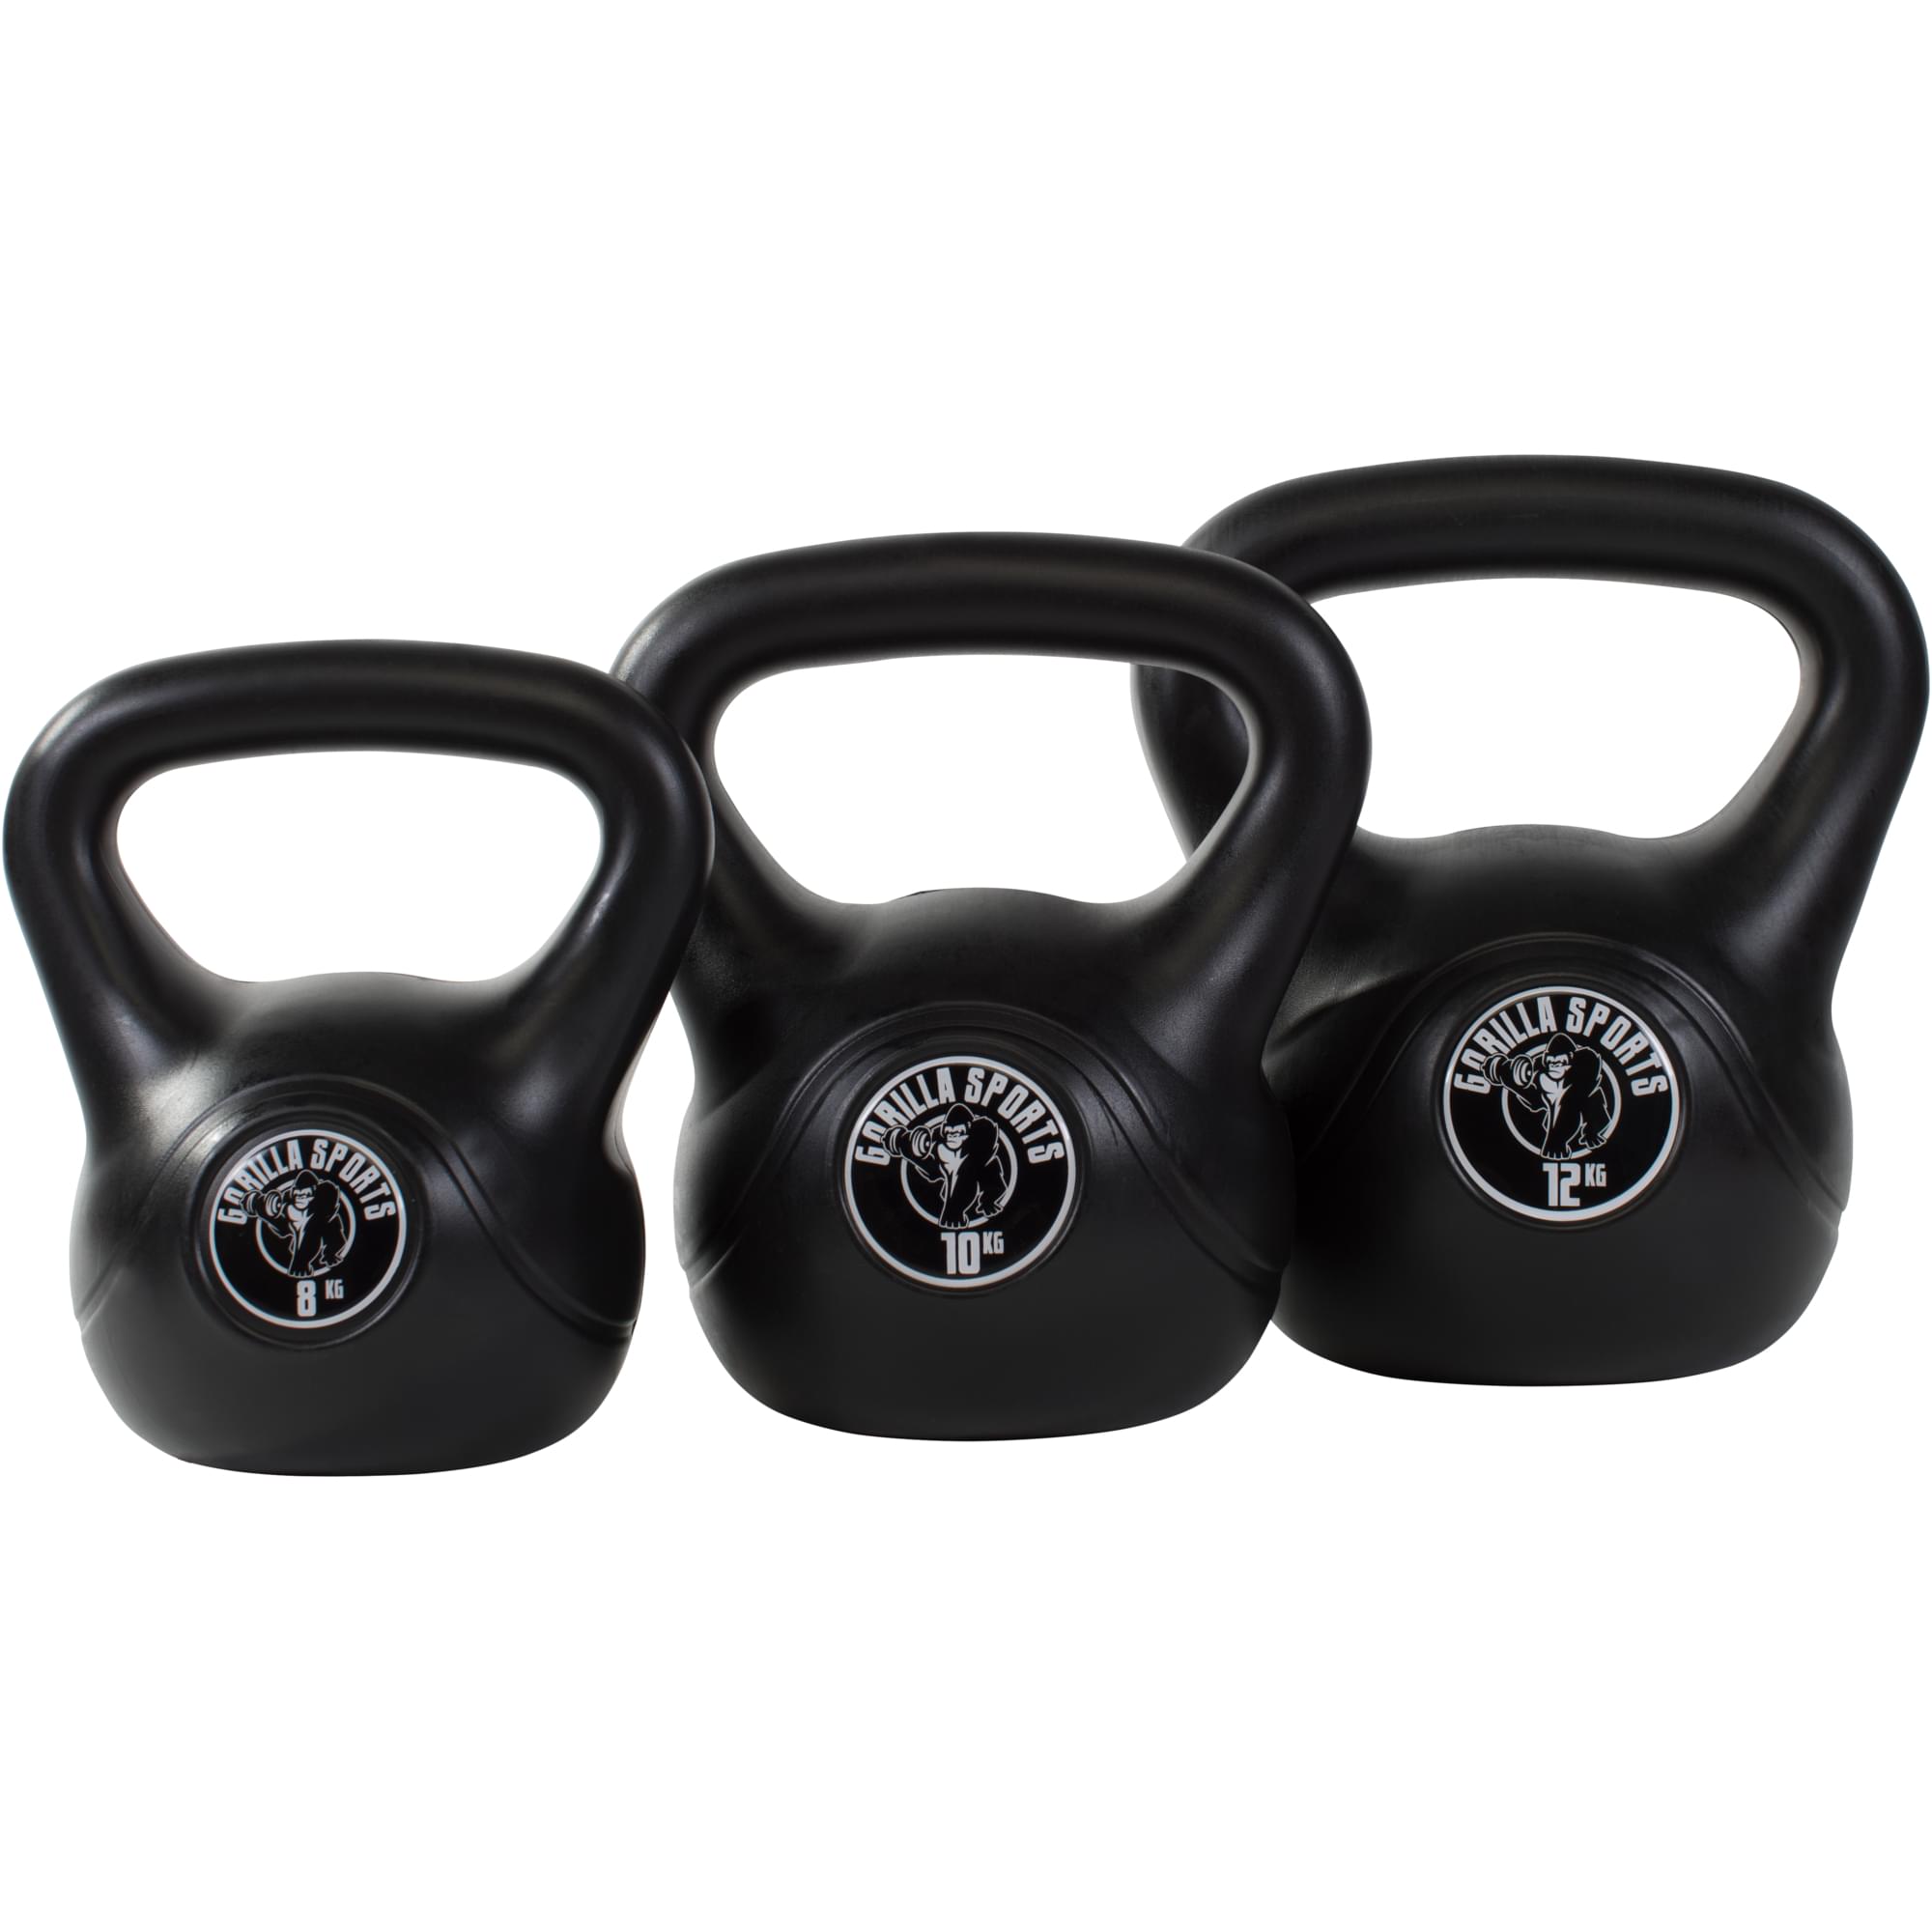 Order a 10KG Competition kettlebell? Buy at GorillaGrip